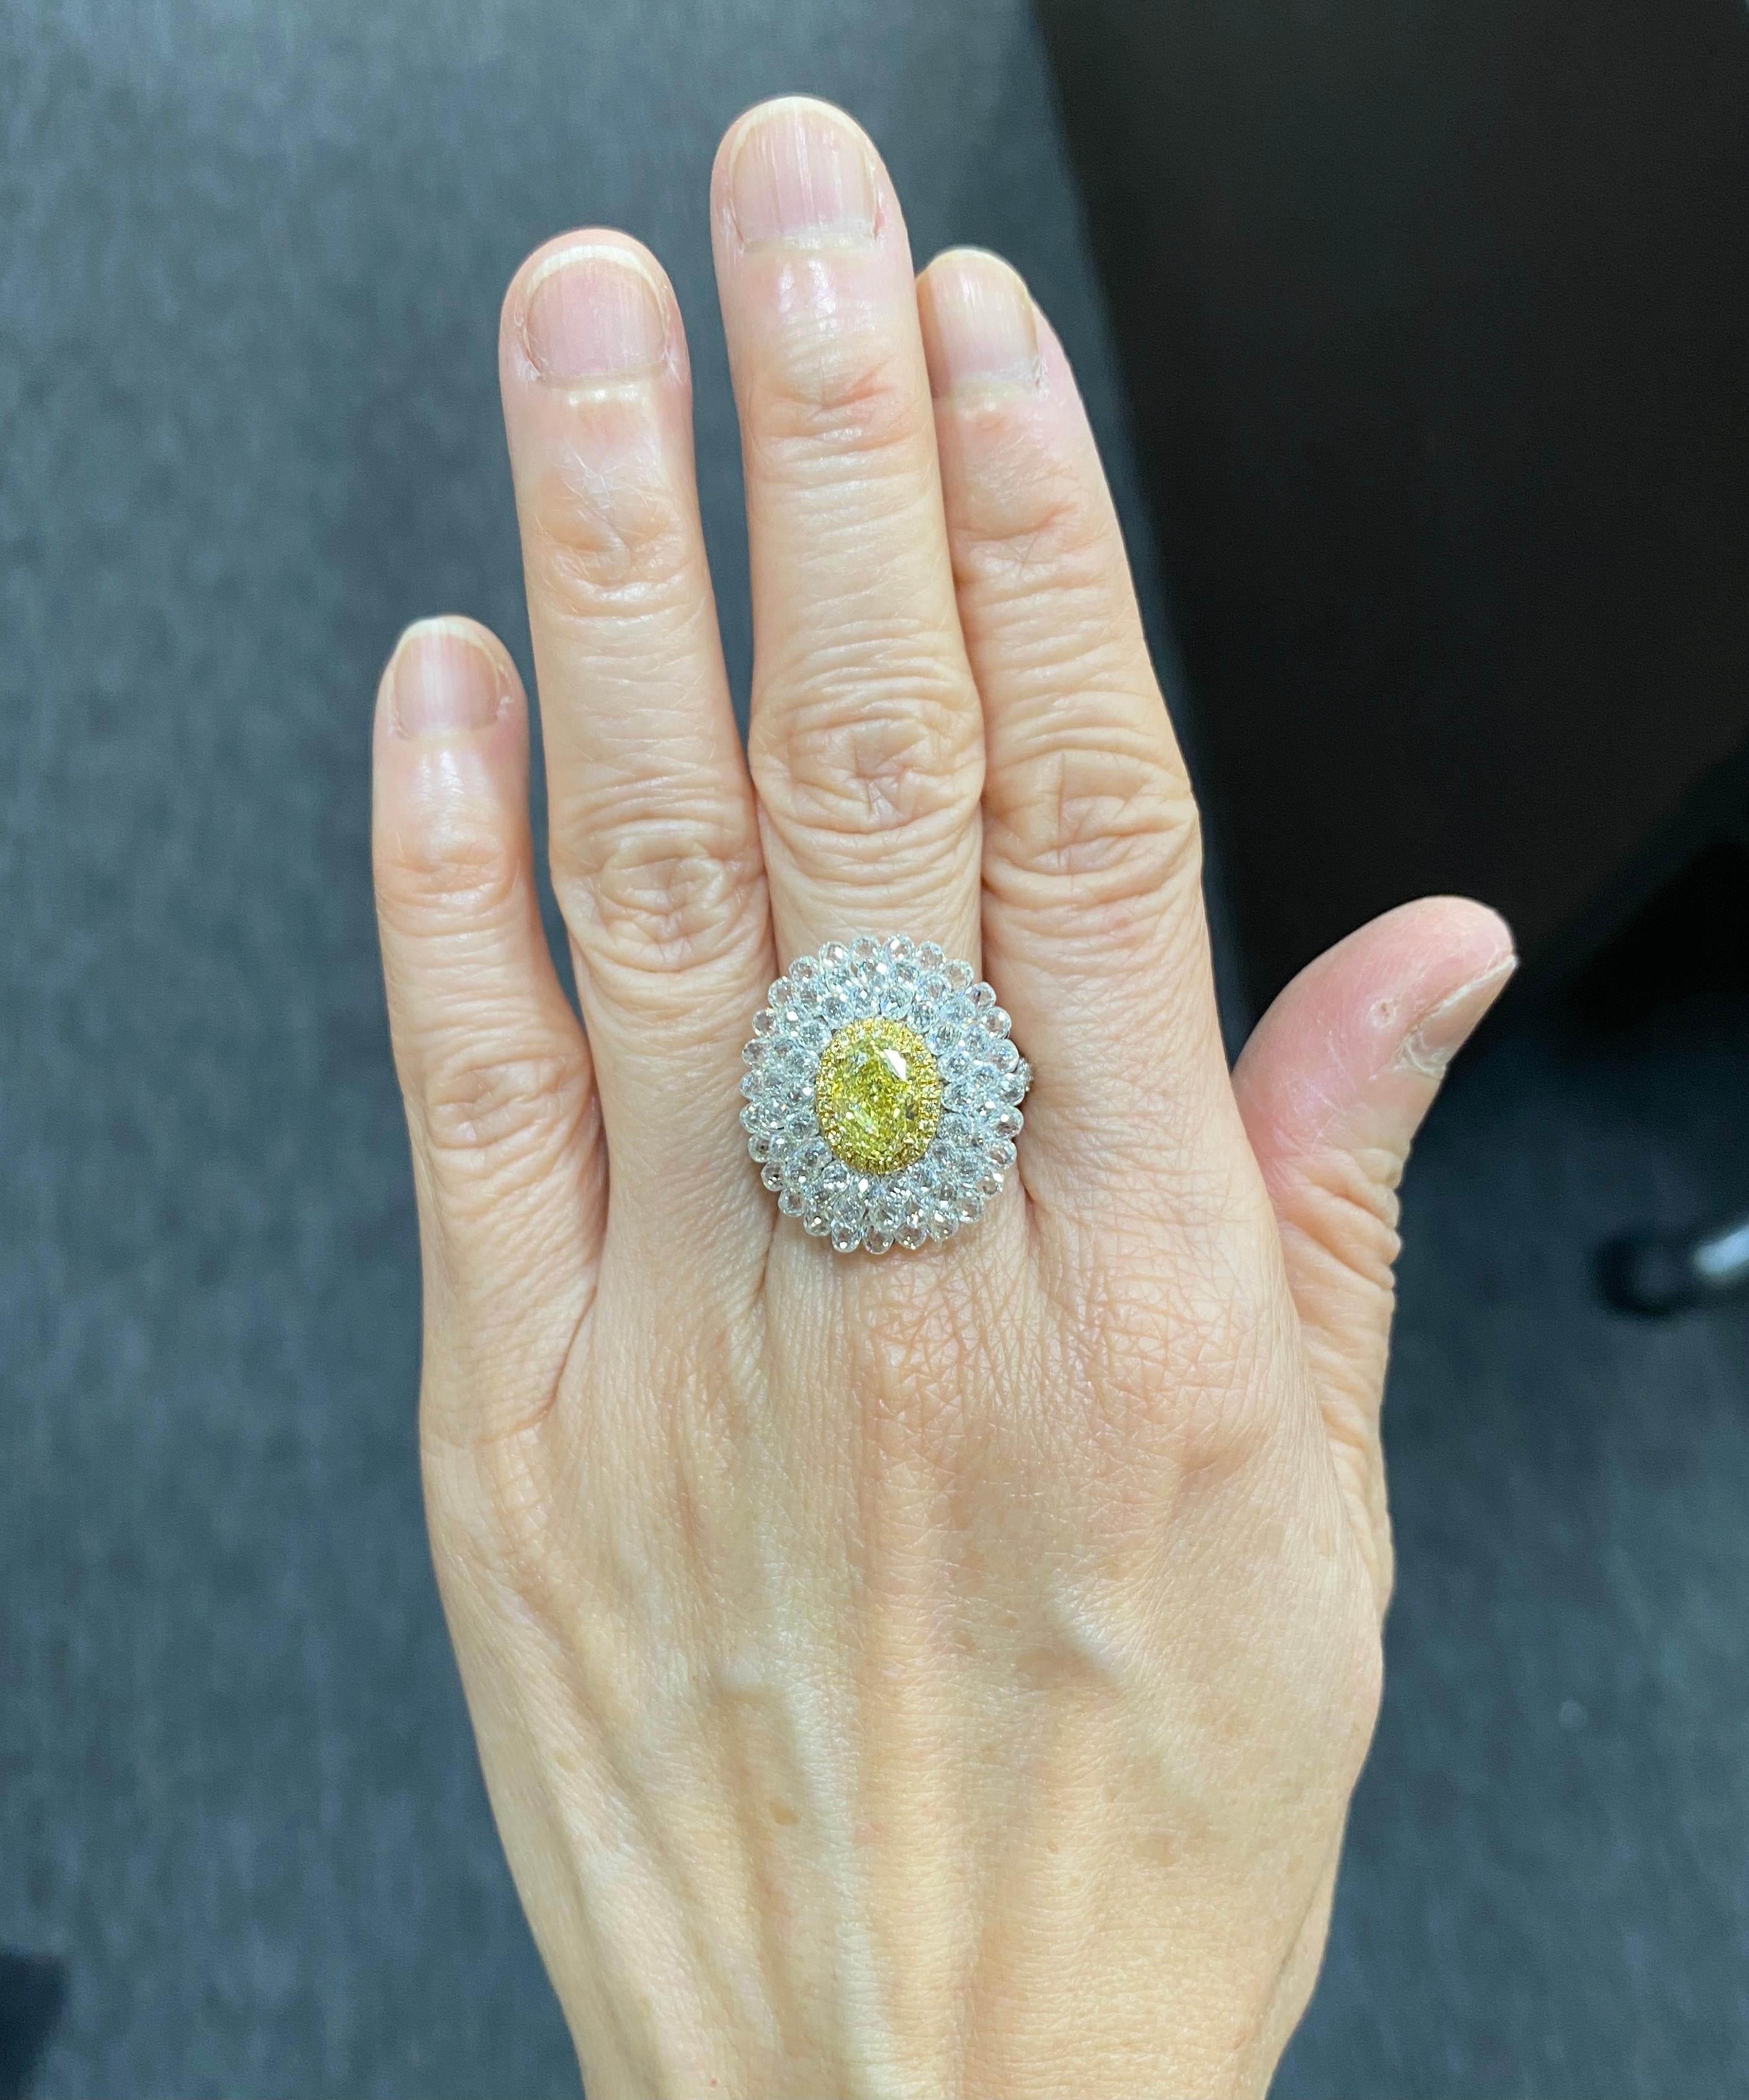 JR Invisible Diamond Briolette & Yellow Diamond Ring

Classic combination of Yellow diamond and white Briolette Ring Featuring 1.77ct Fancy Yellow / VS  Oval Shape as the center piece and studded with 7.97 carats Invisible Setting of White Diamond